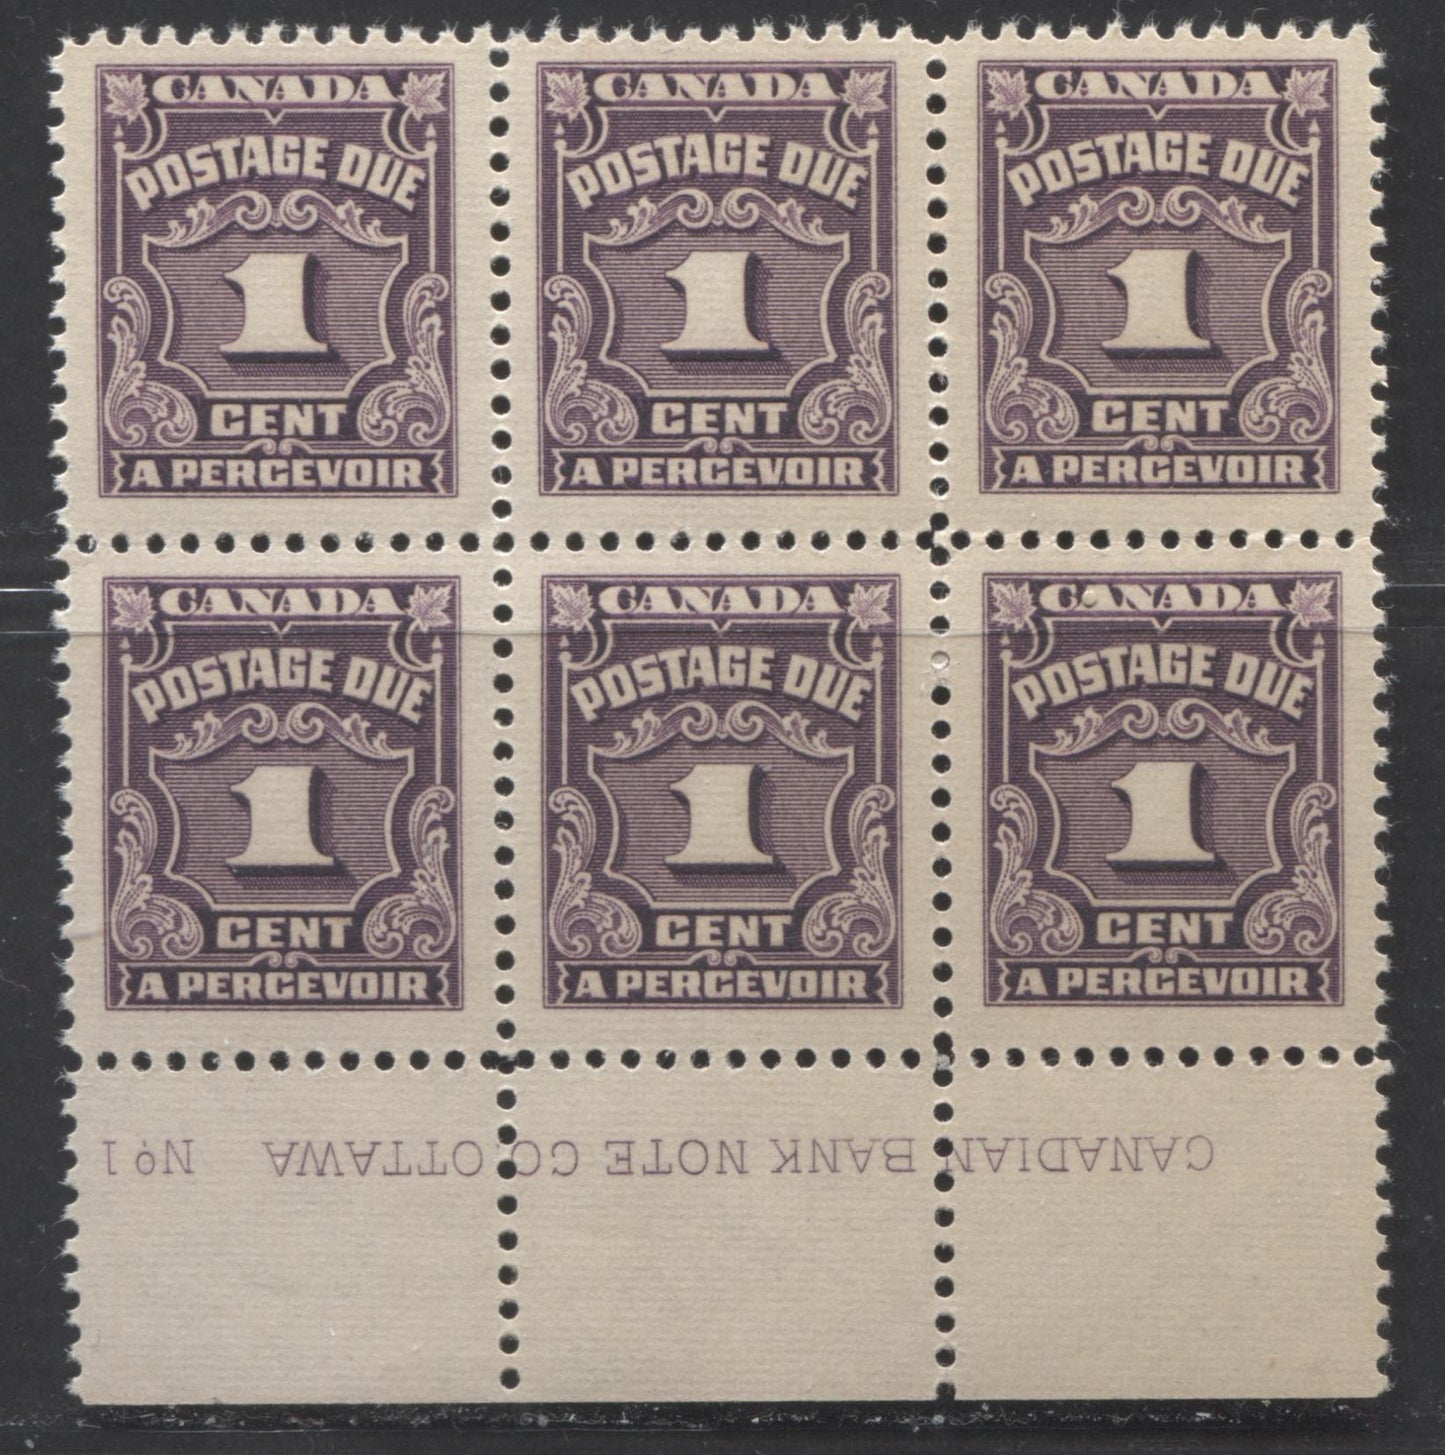 Lot 49 Canada #J15 1c Deep Reddish Lilac, 1935-1965 Fourth Postage Due Issue, A VFNH Lower Plate 1 Block Of 6 On Horizontal Ribbed Paper With Yellowish Cream Gum, Likely From 1935-1942